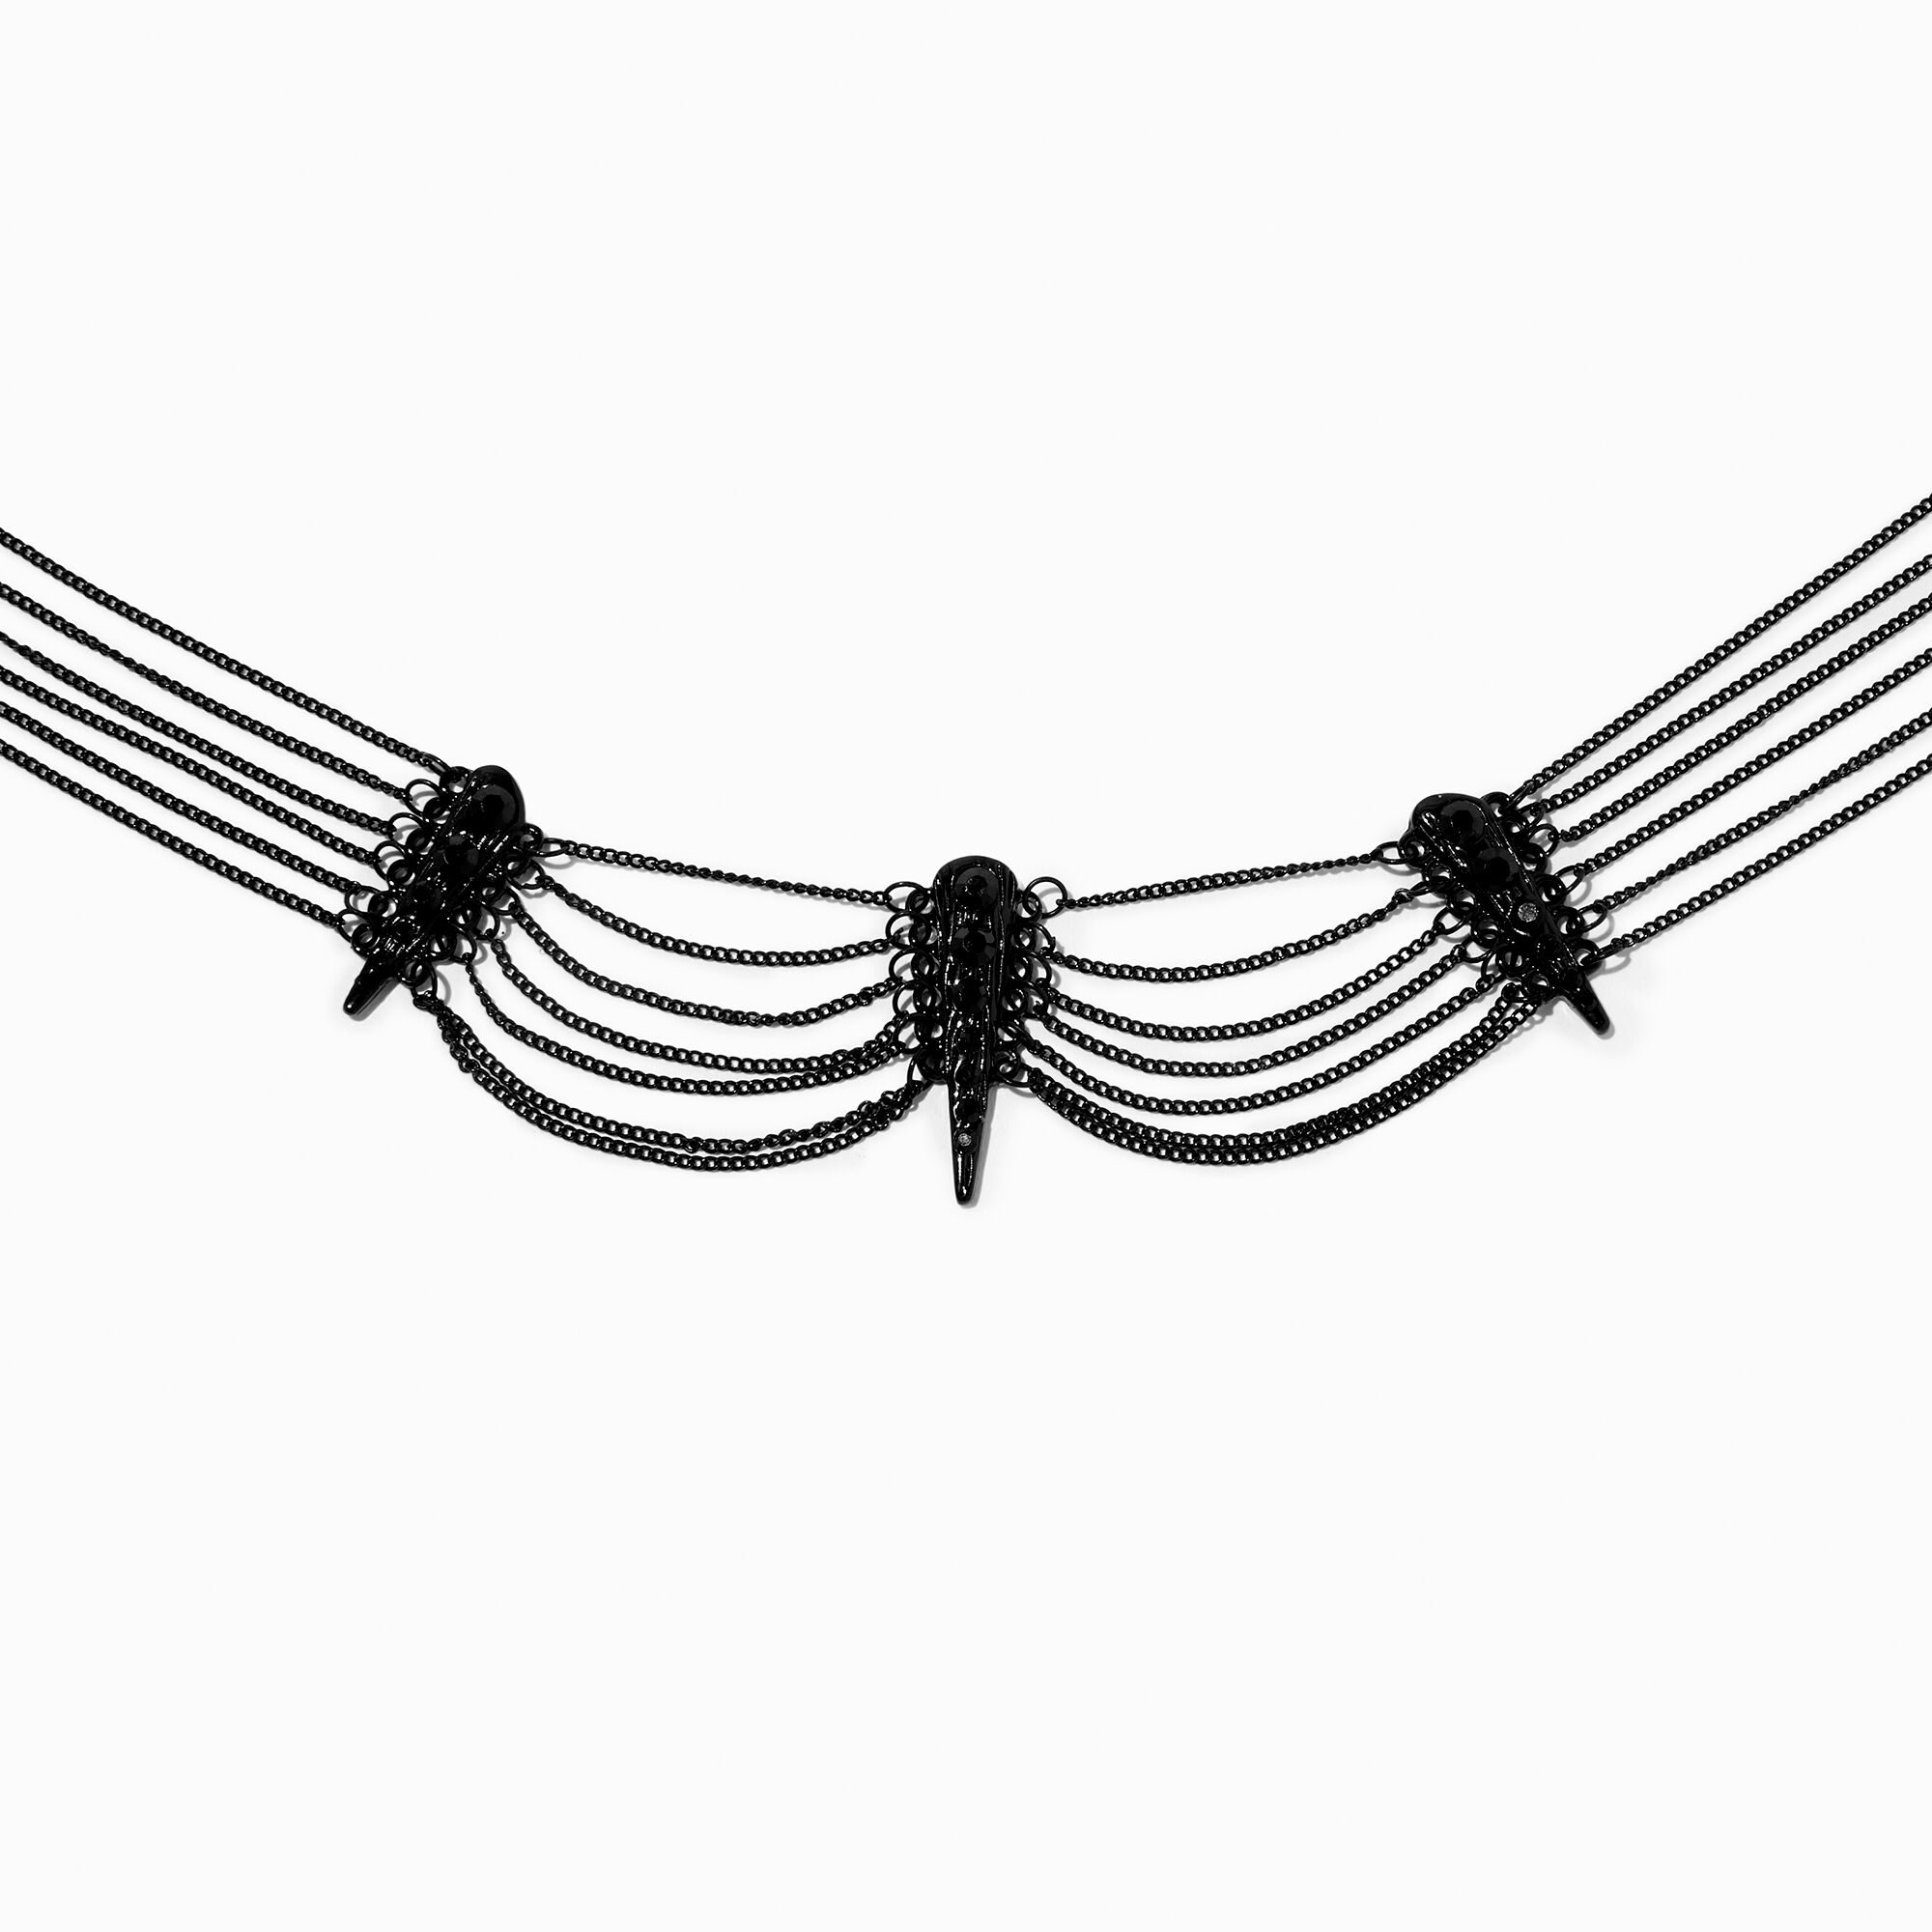 Choker Necklaces for Women / Black Choker Necklace / Goth Chokers / Birthday Gift / Modern Necklaces / Black Lace / Black Lace Chocker